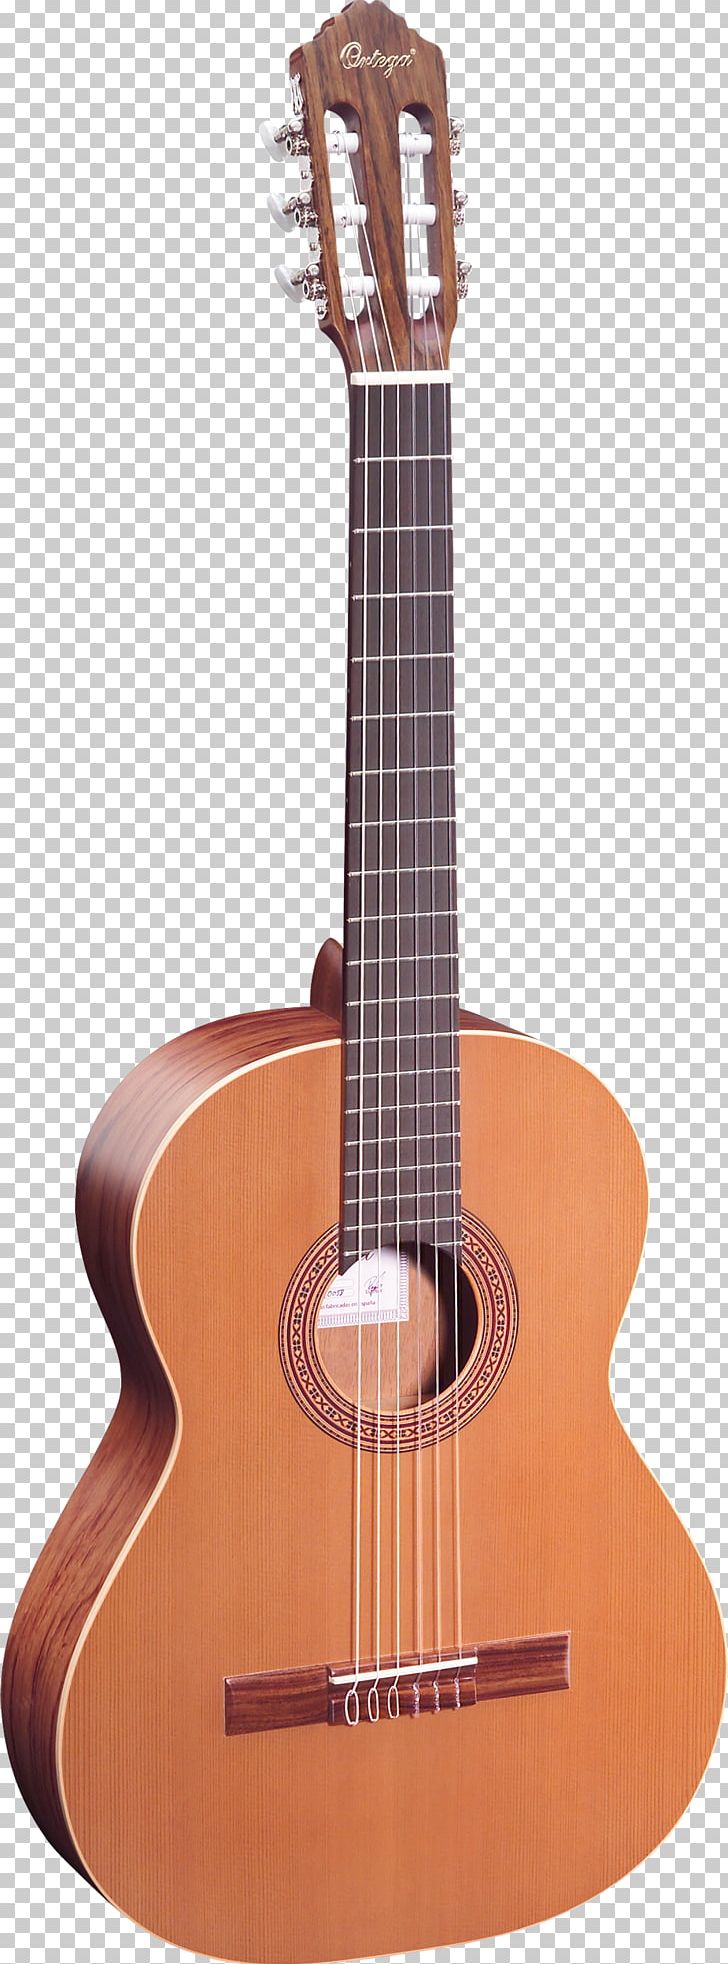 Steel-string Acoustic Guitar Classical Guitar Acoustic-electric Guitar PNG, Clipart, Amancio Ortega, Classical Guitar, Cuatro, Cutaway, Guitar Accessory Free PNG Download